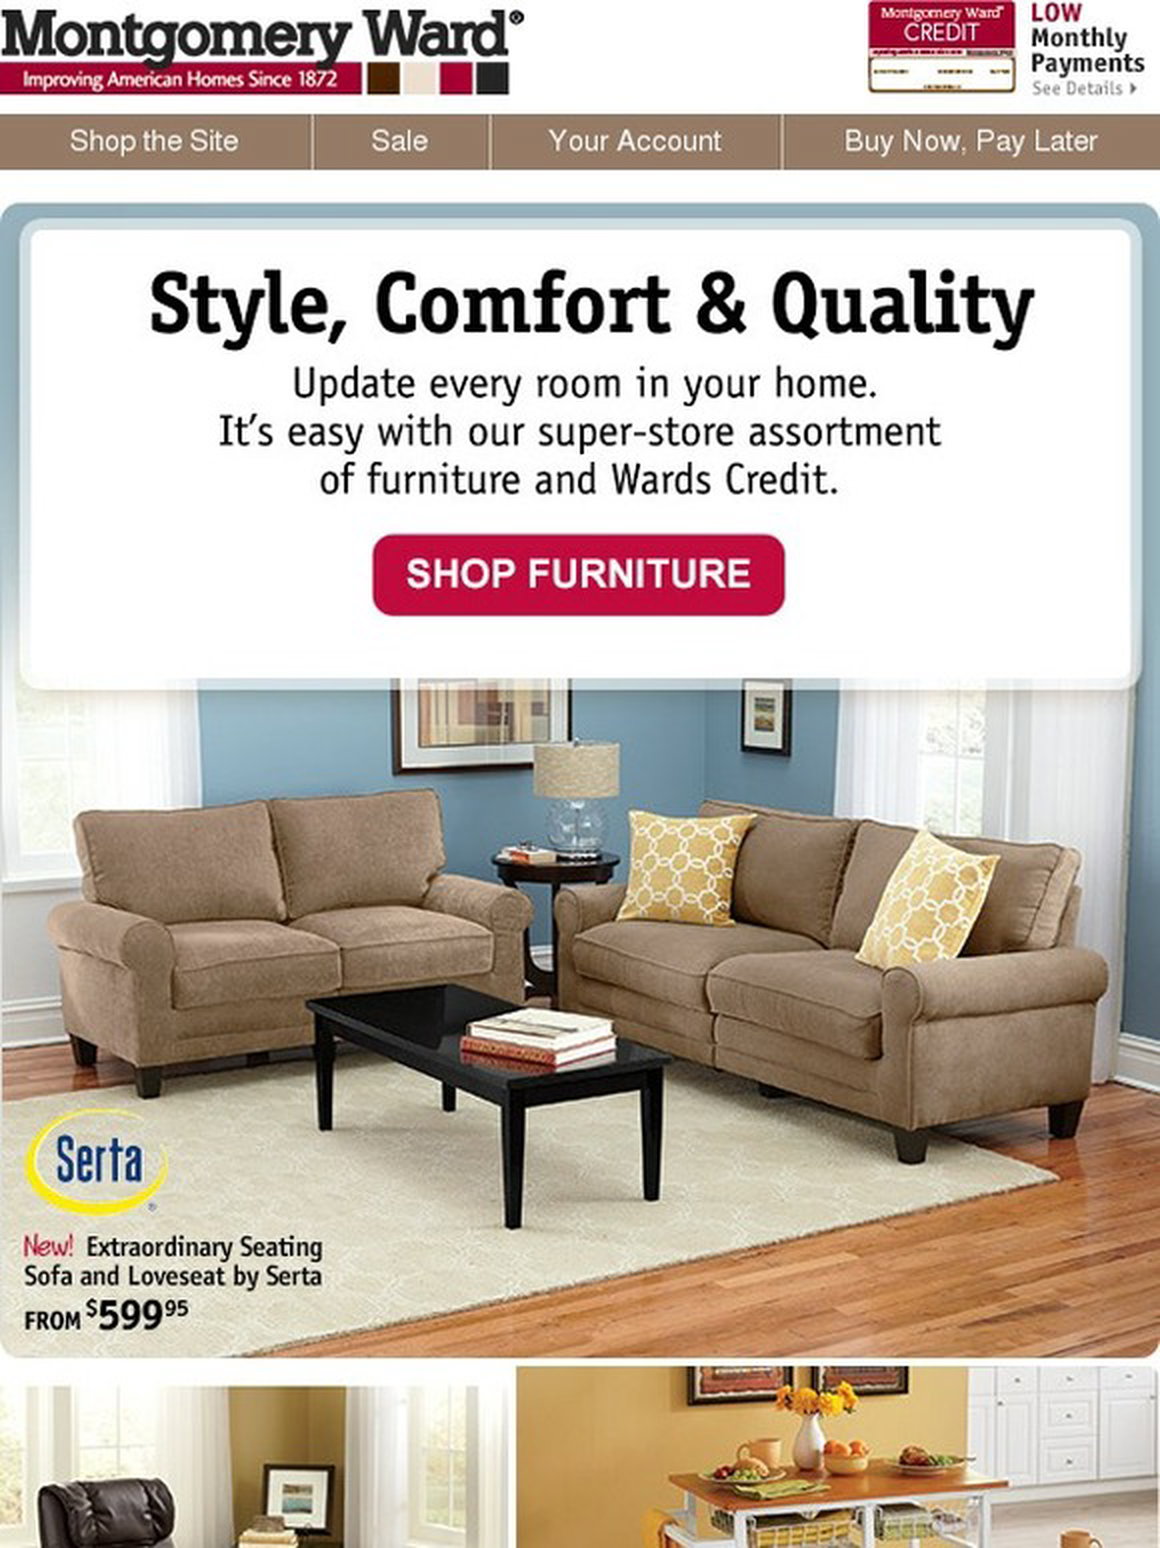 Montgomery Ward Wow 1000s Of Furniture Choices For The Whole